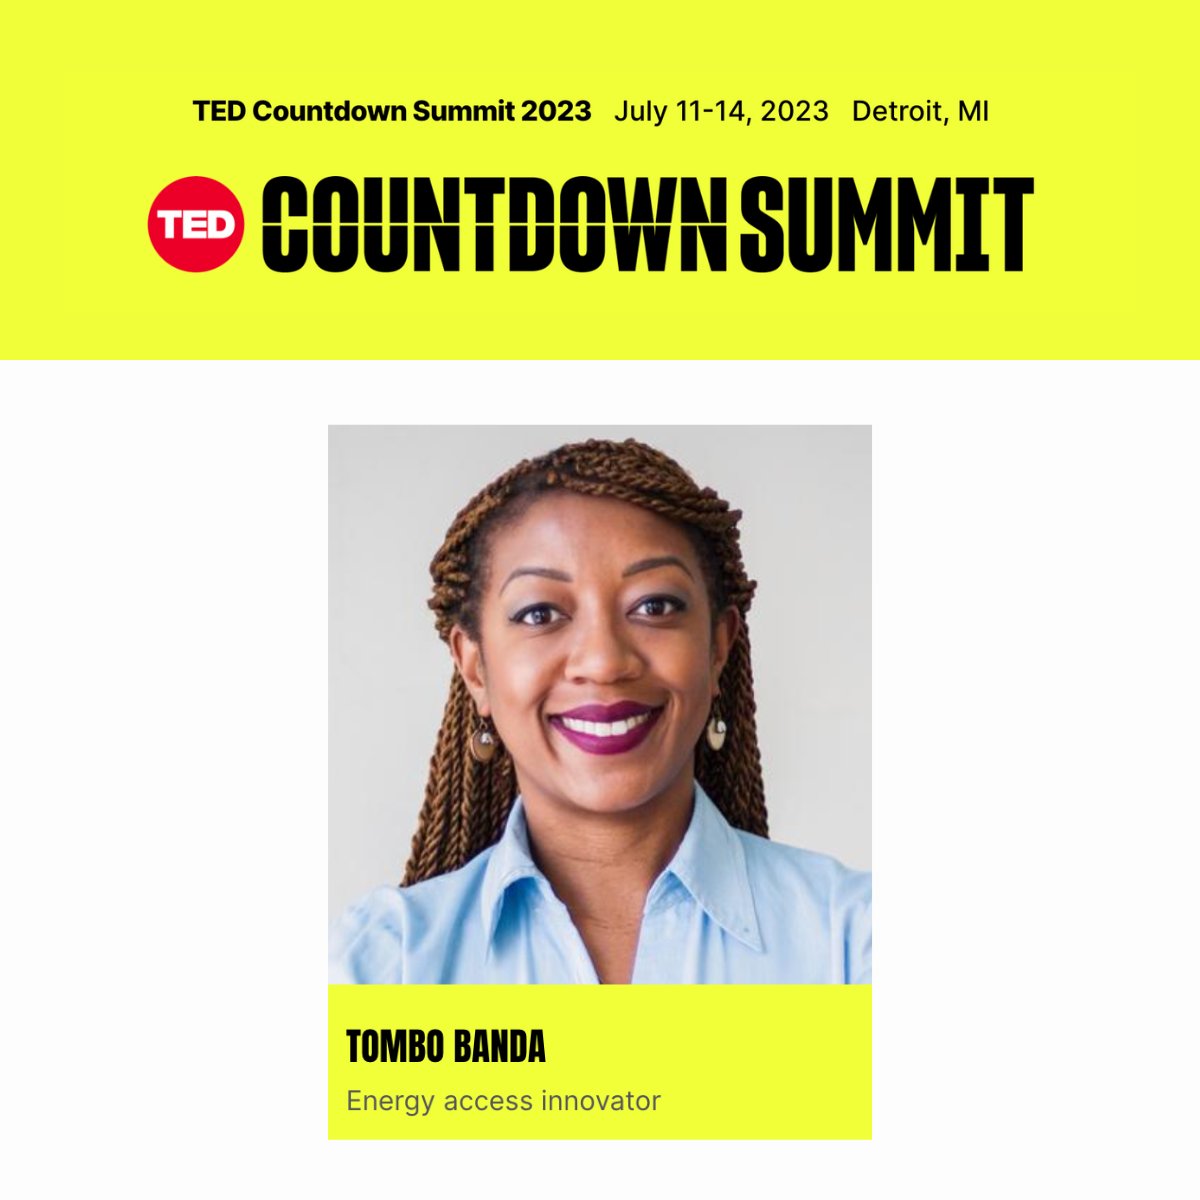 💡Tombo Banda, Head of CrossBoundary's Mini-Grid Innovation Lab, is set to take the stage this week at @TEDCountdown - an event to champion bold ideas & underinvested solutions (like #minigrids!) to help realize a cleaner, greener, more just world